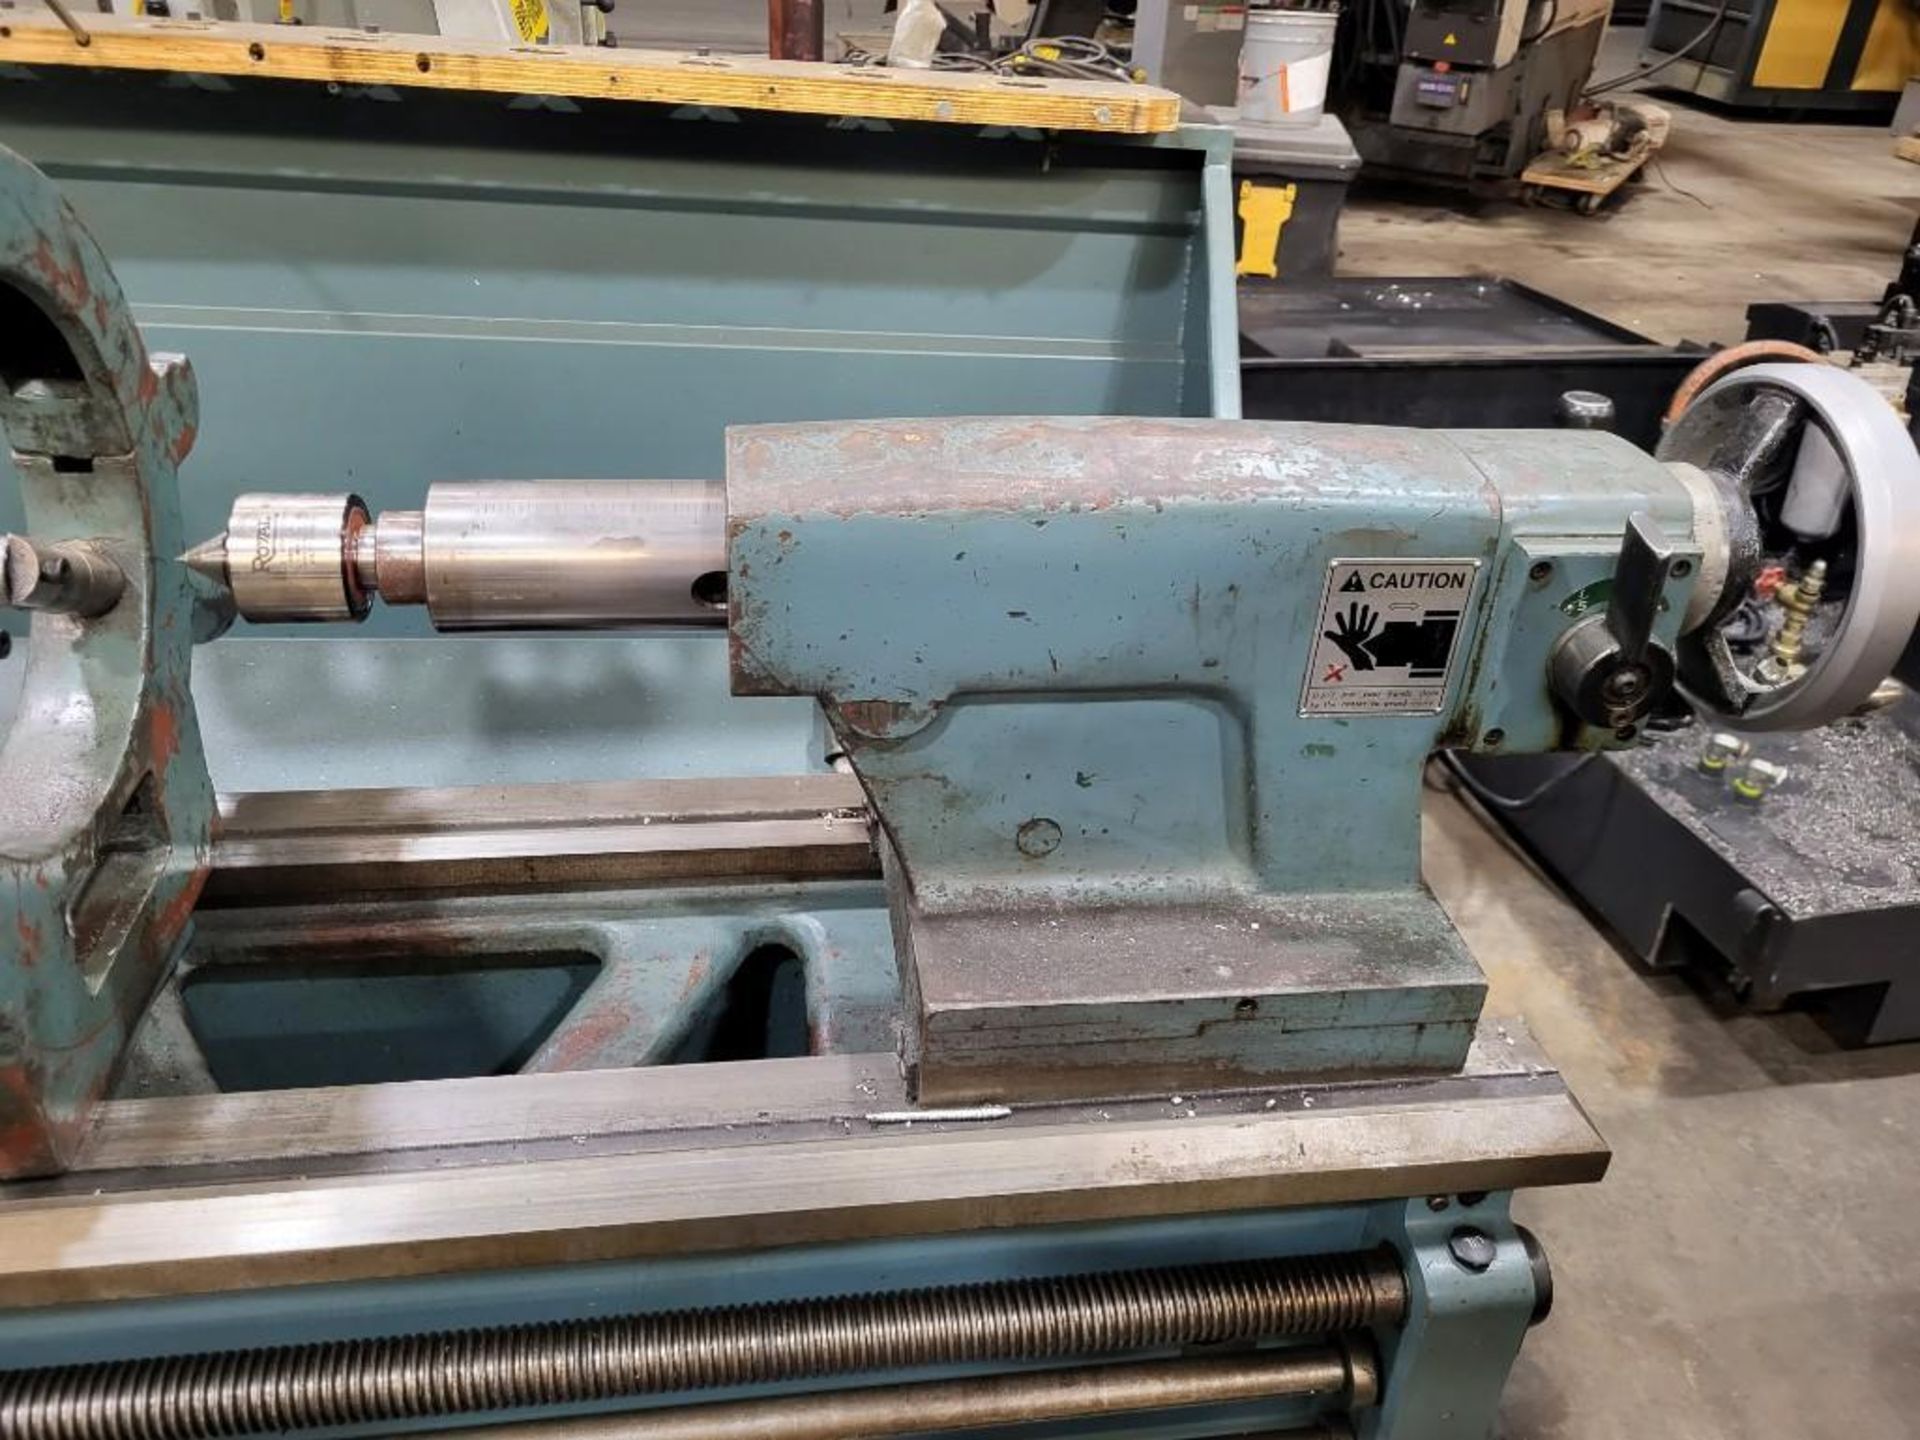 VICTOR 2080S 20" X 80" GAP BED PRECISION LATHE, WITH TAILSTOCK, CHUCK, STEADY REST, TOOLING - Image 18 of 28